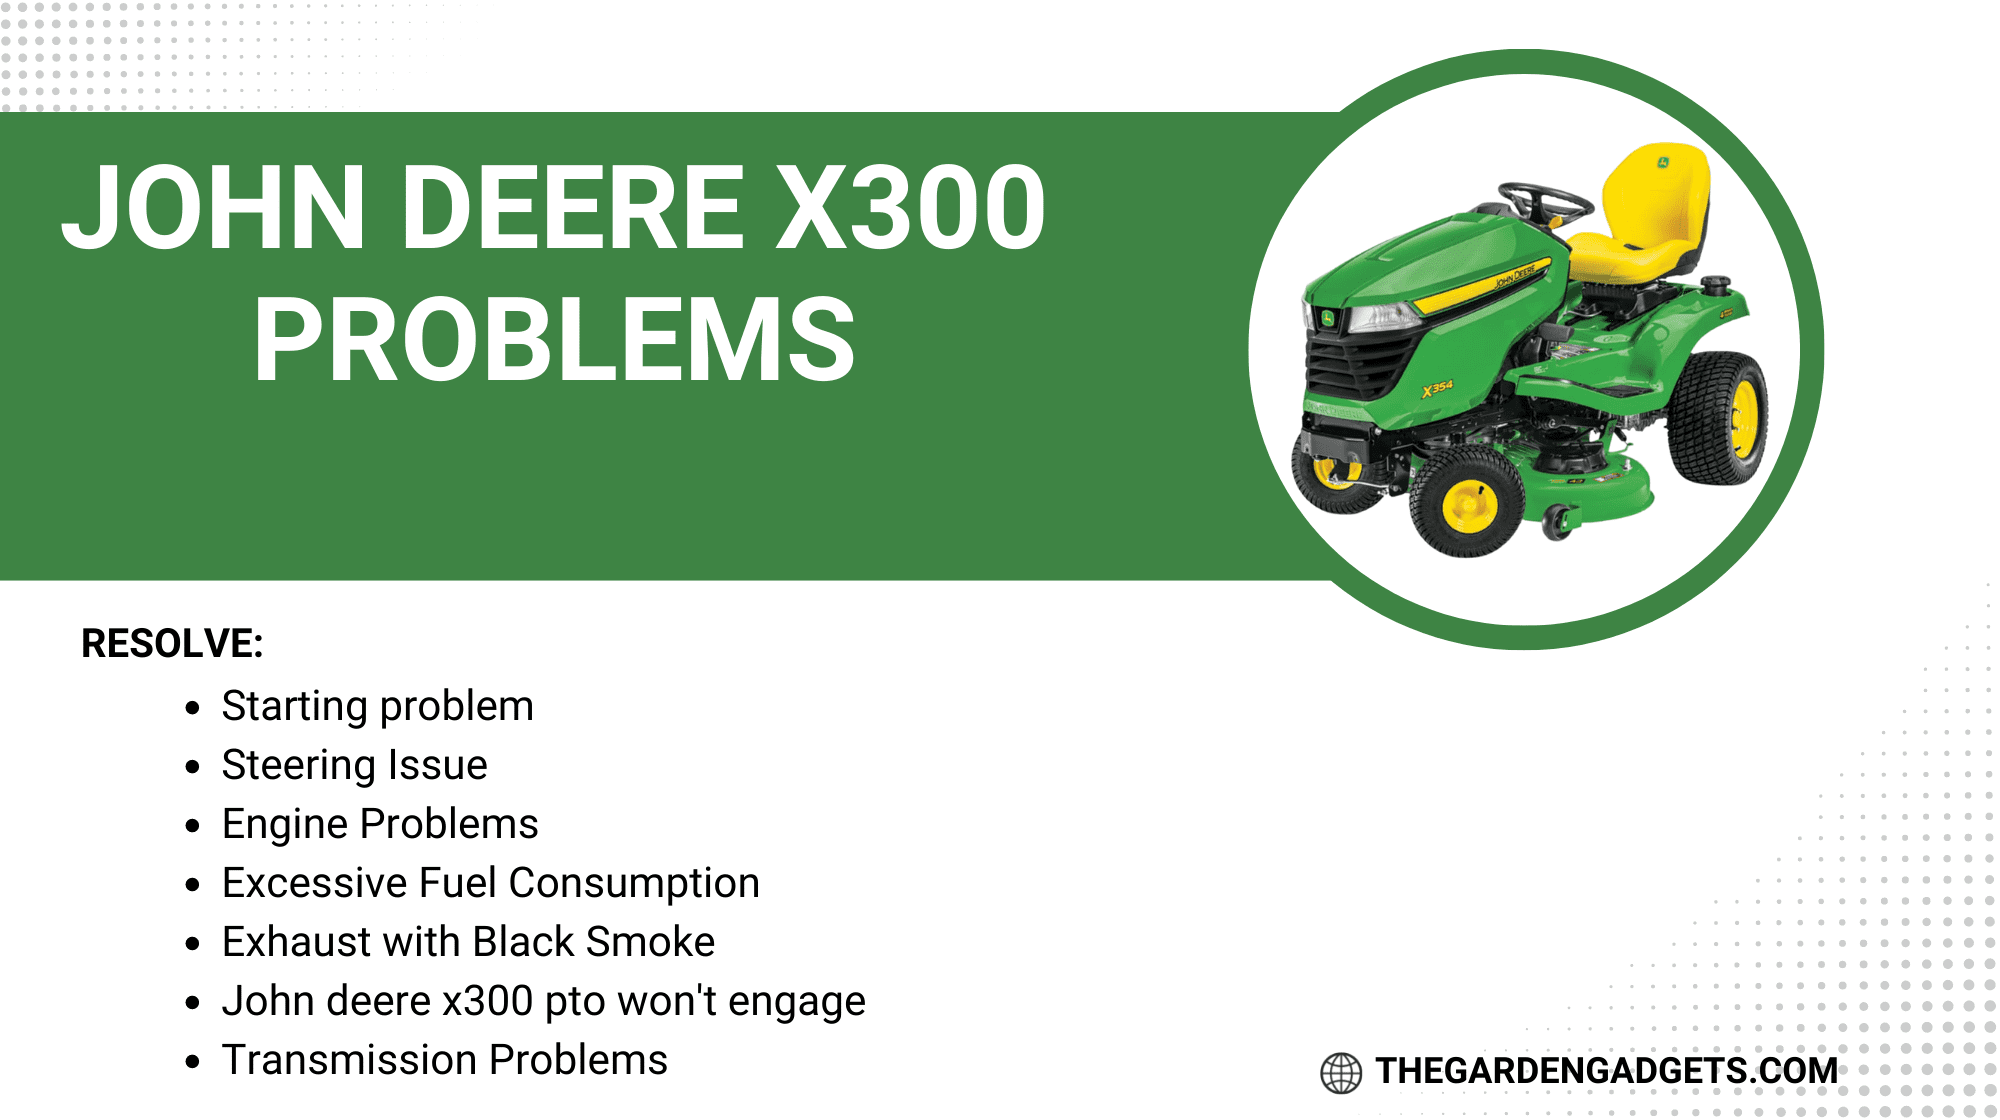 X300 Owner Information, Parts & Service